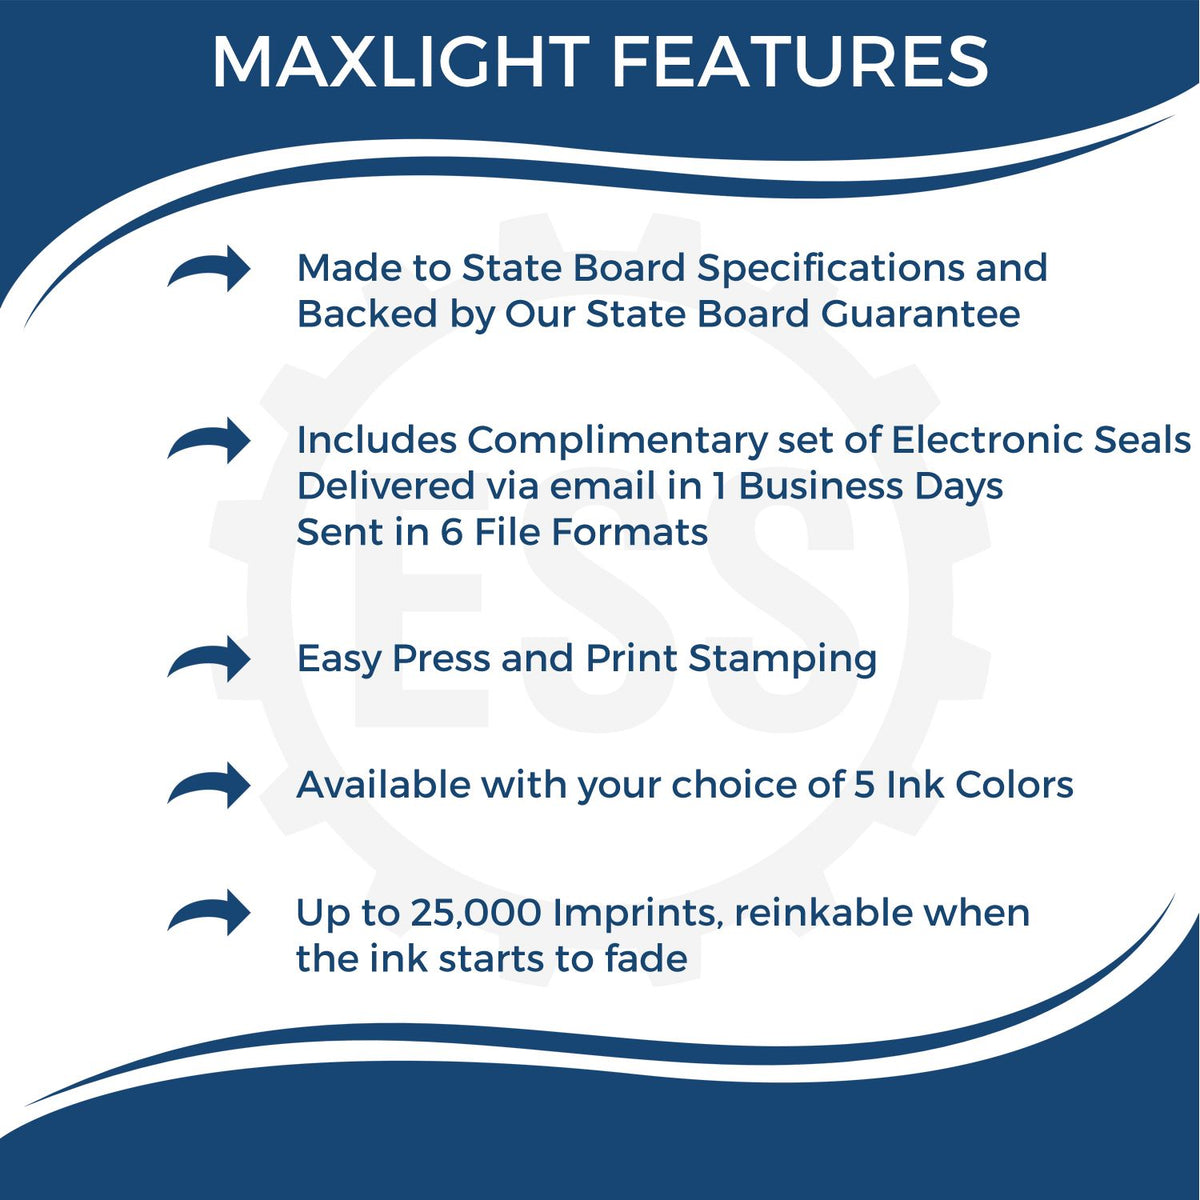 A picture of an infographic highlighting the selling points for the MaxLight Premium Pre-Inked Massachusetts State Seal Notarial Stamp